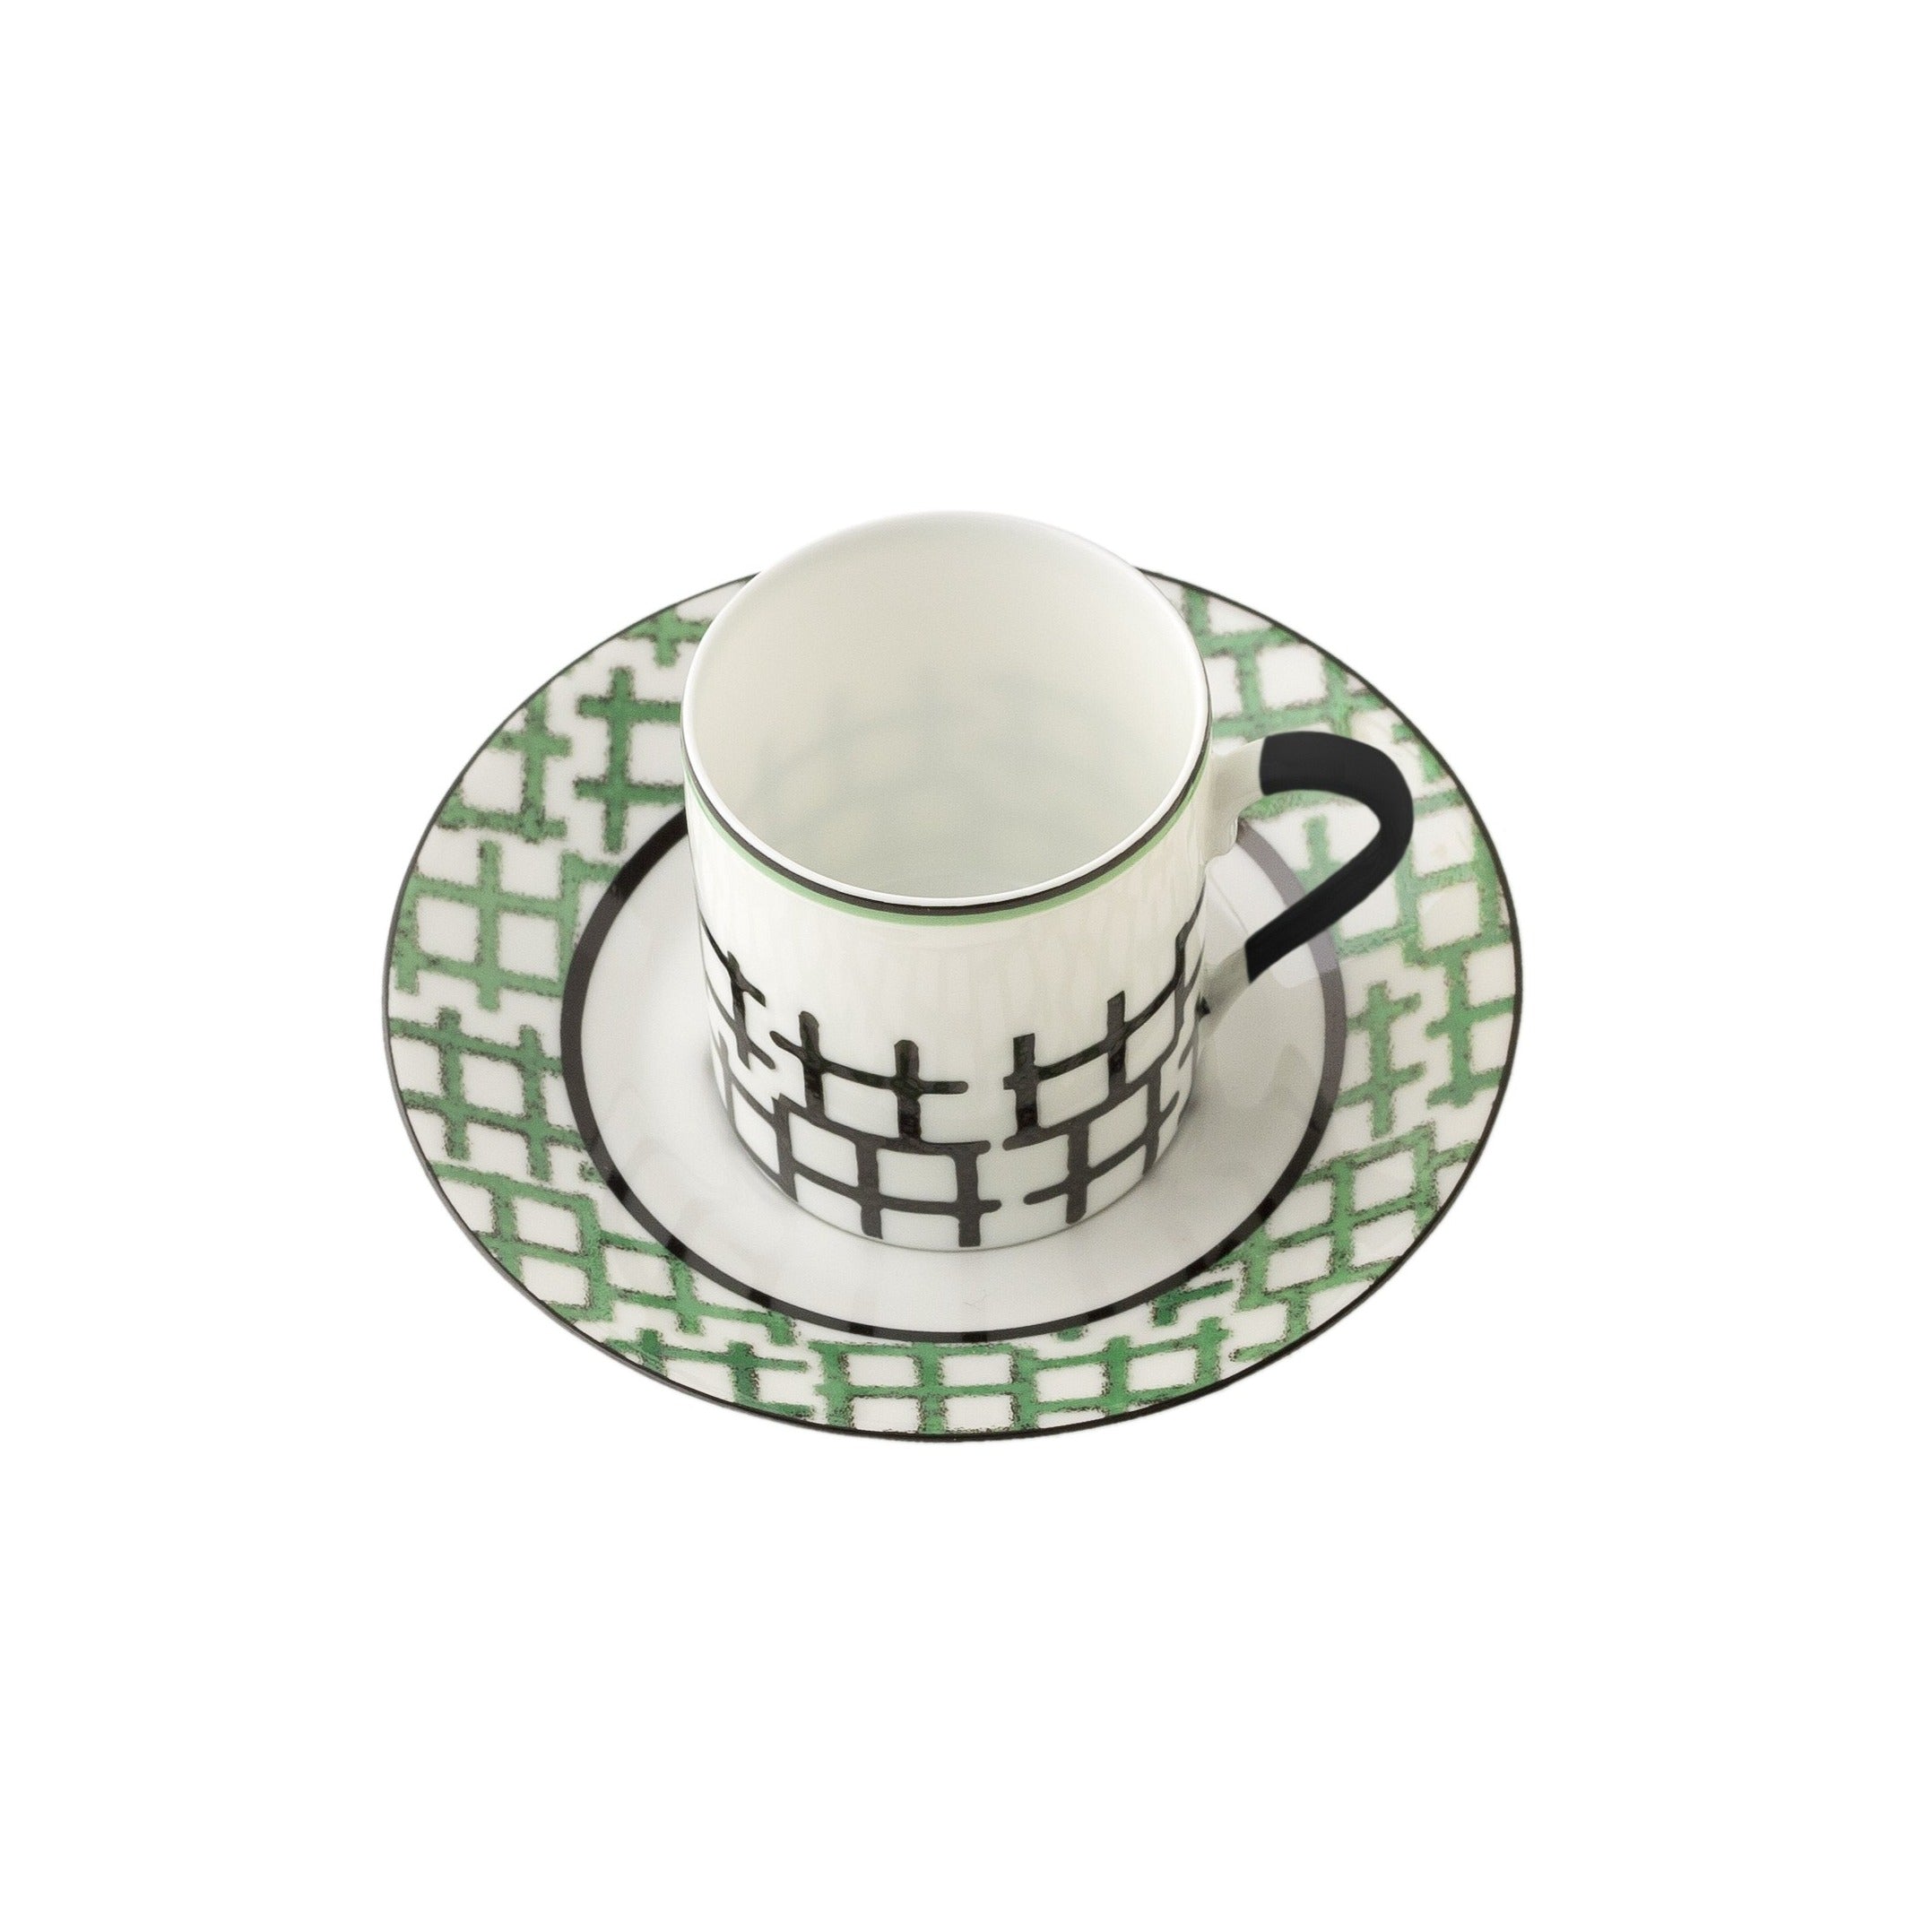 Menta - Coffee cup and saucer